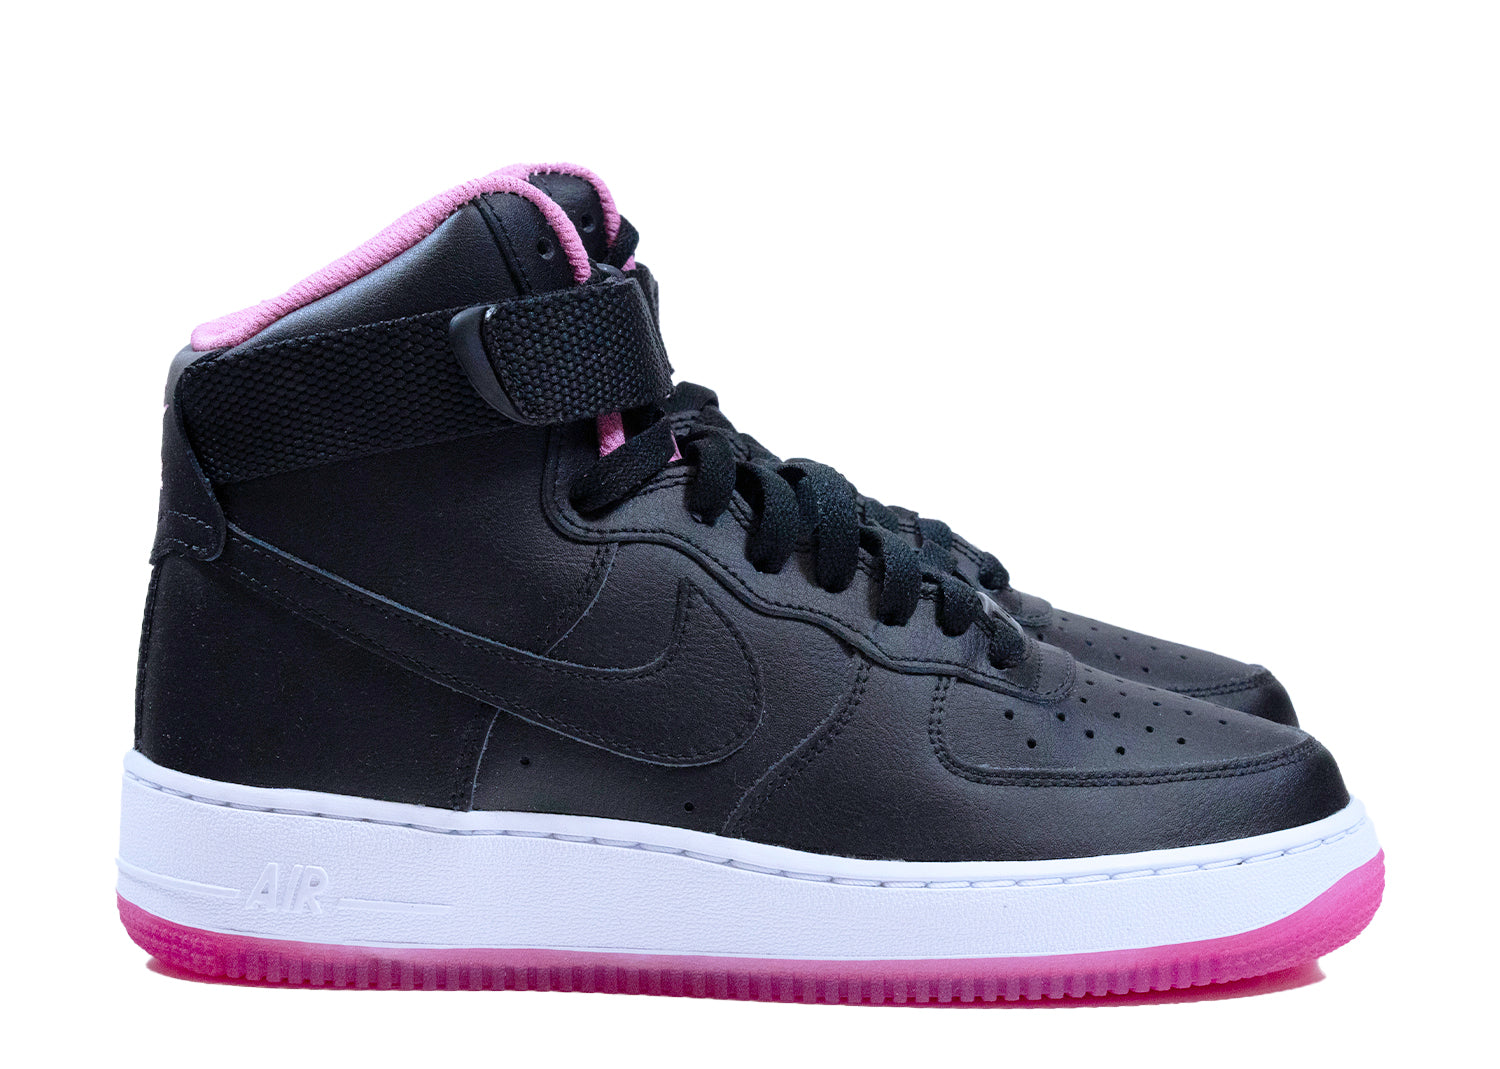 Second Chance - motors Nike Air Force 1 High ID Black/pink - 38,5 | NEW